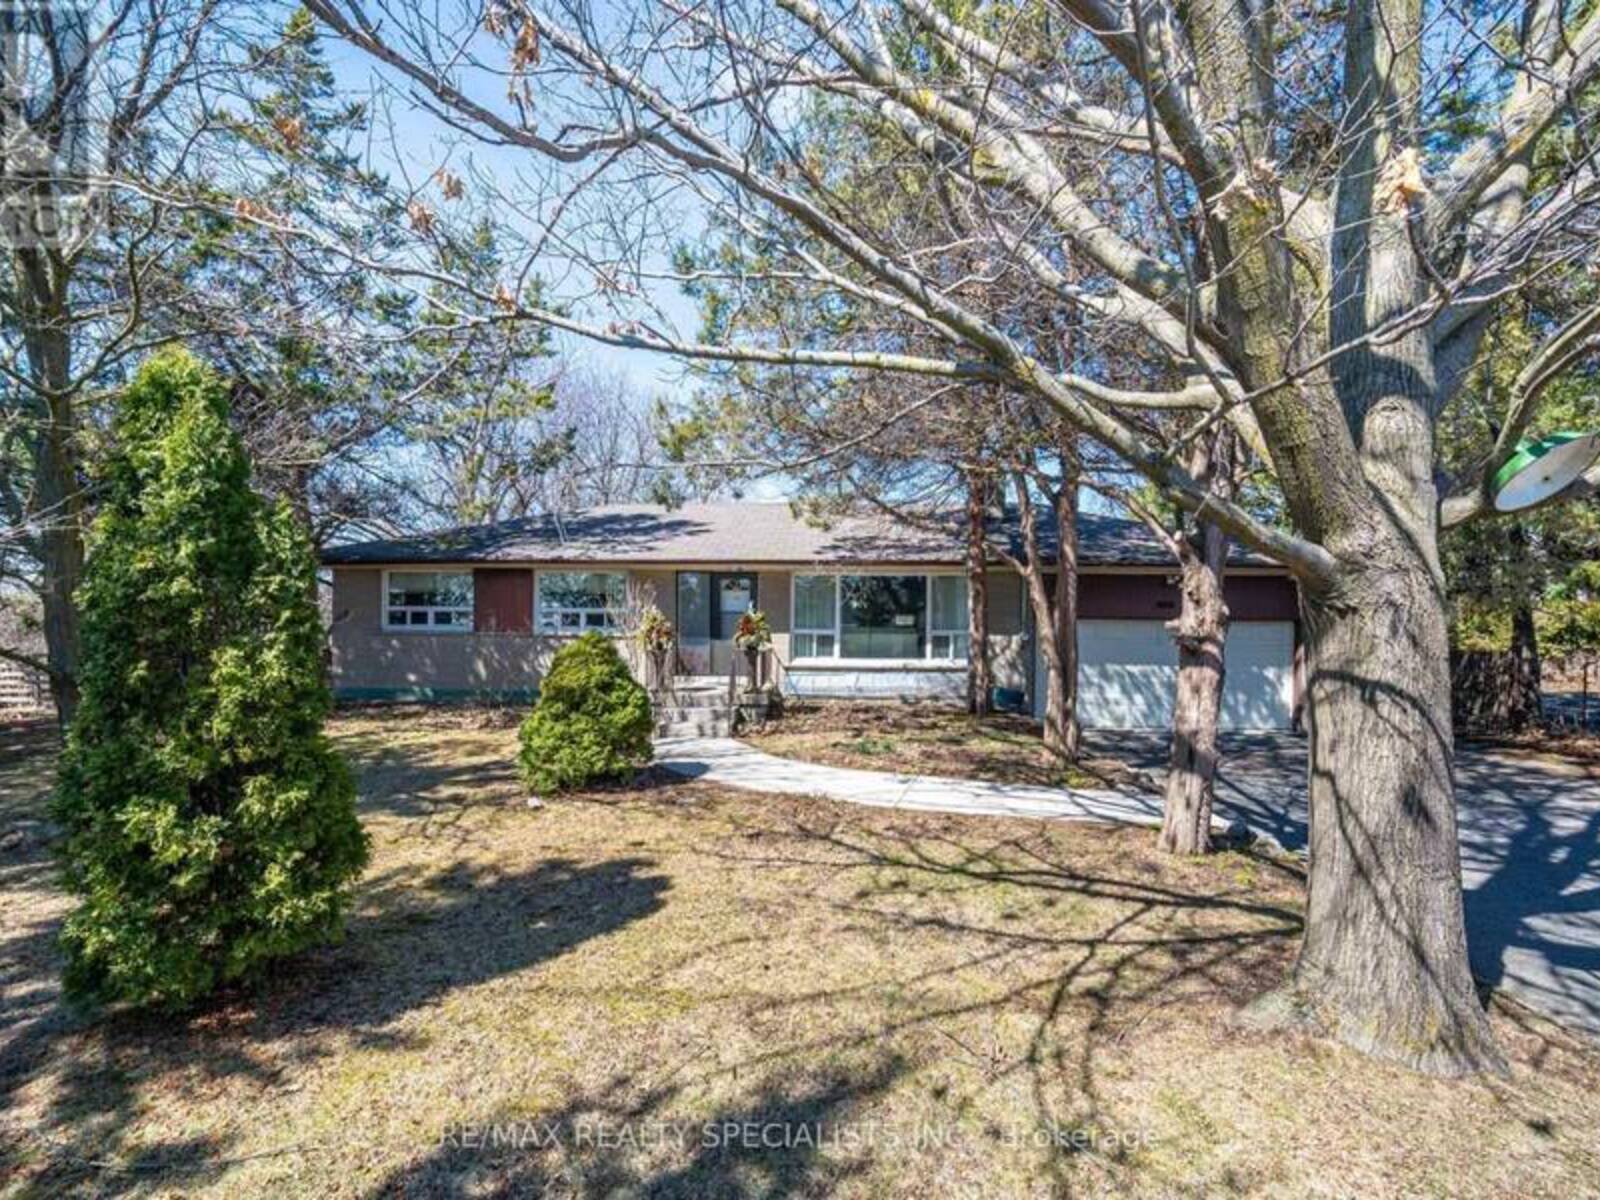 8026 MAYFIELD ROAD, Caledon, Ontario L7E 0W2